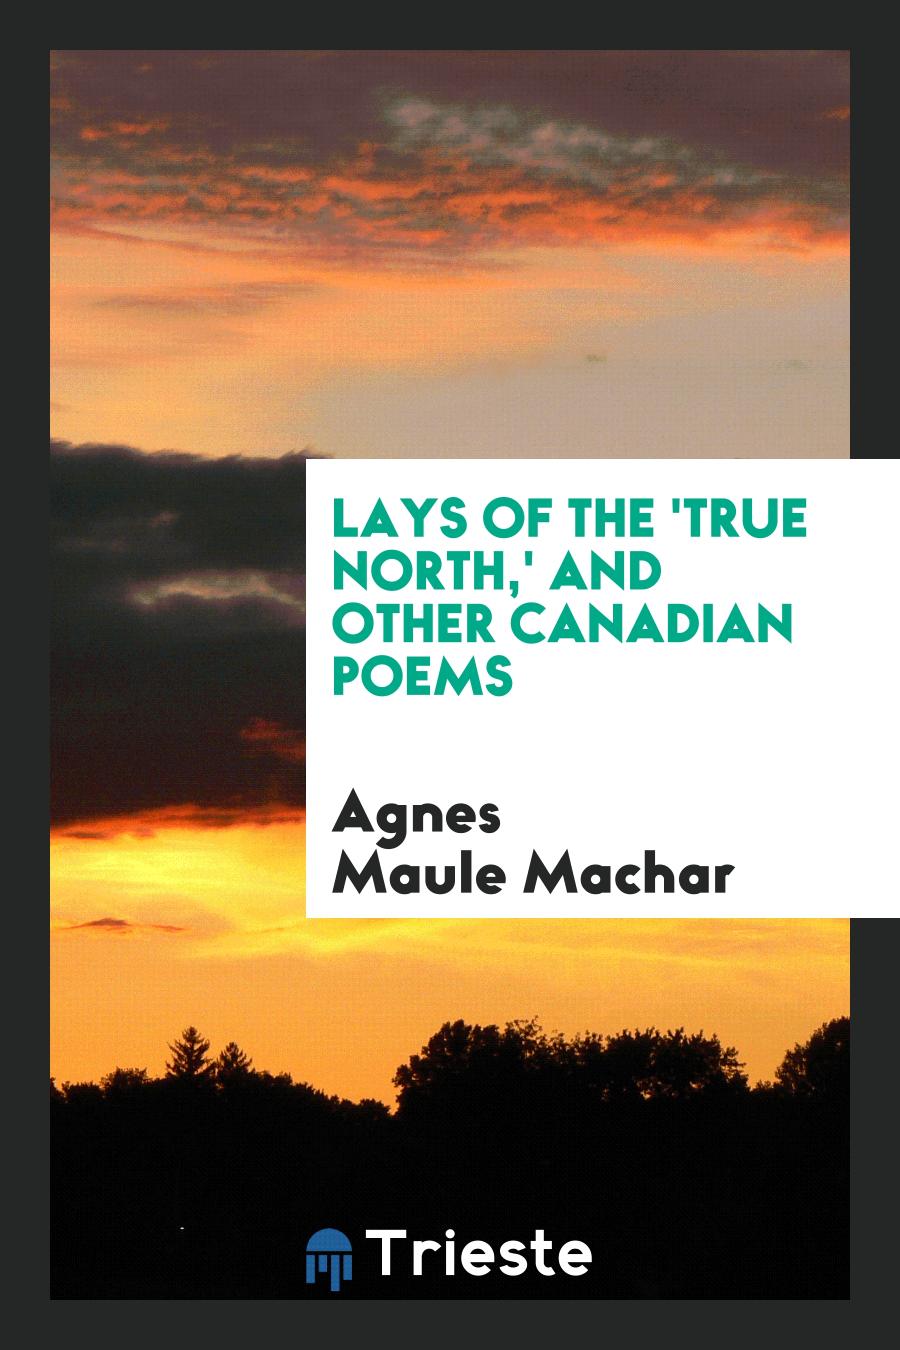 Lays of the 'True North,' and Other Canadian Poems